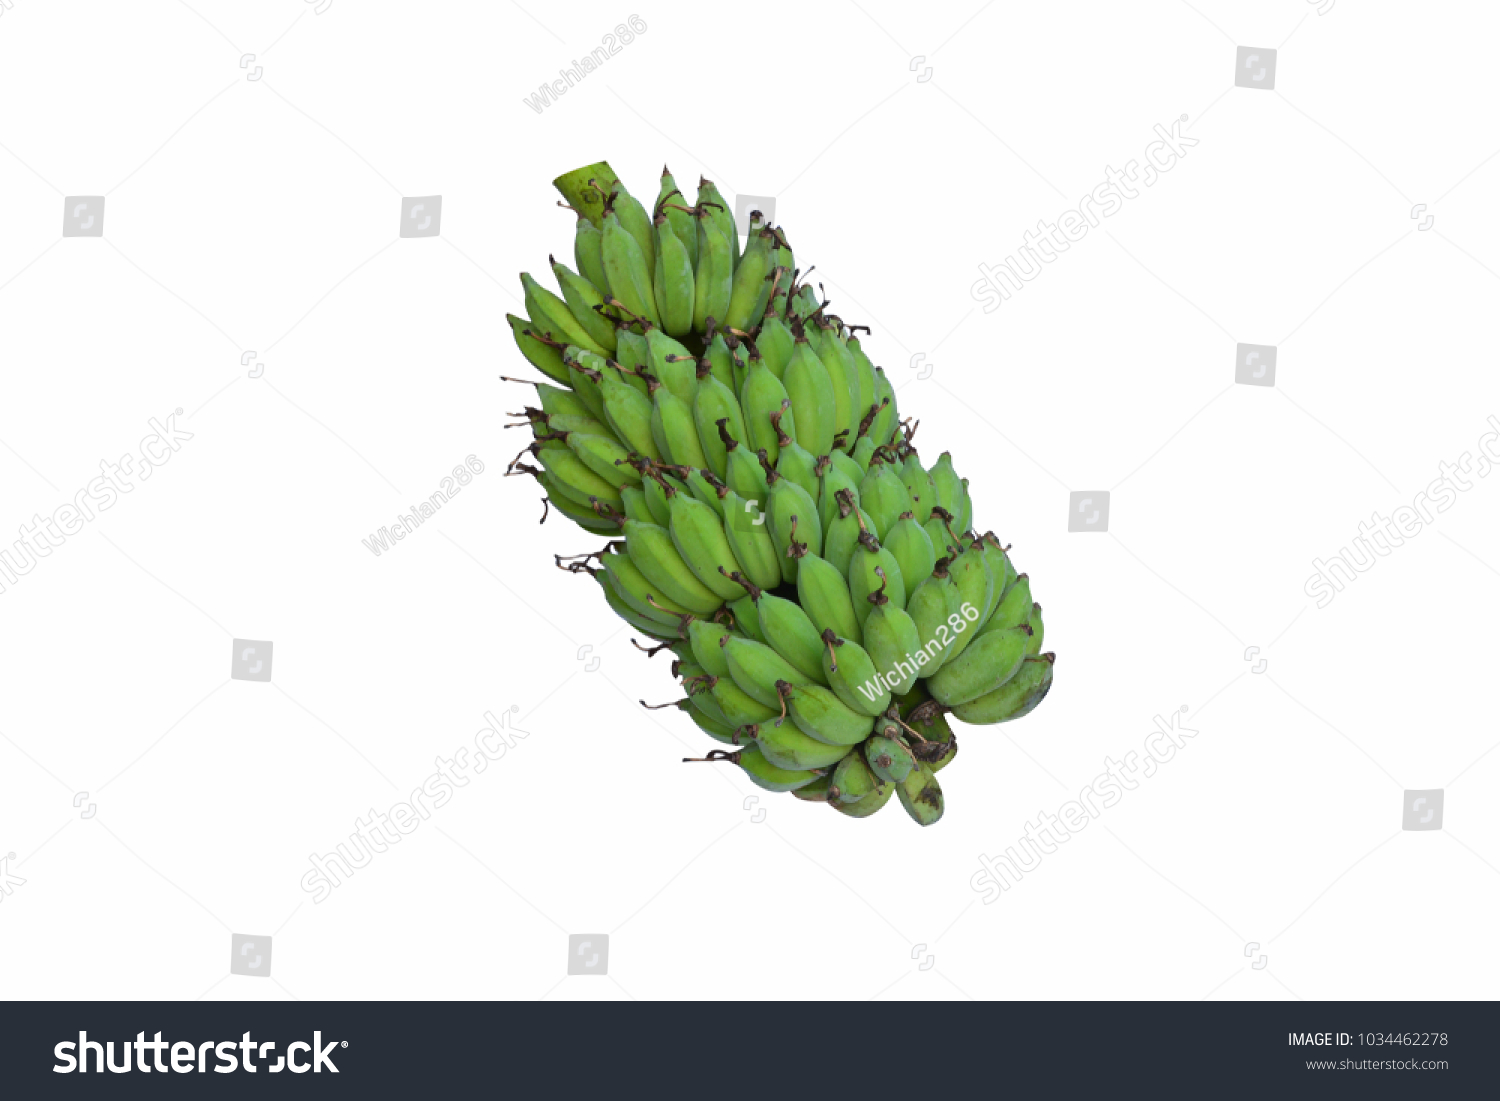  Raw bananas from the garden On a white background #1034462278